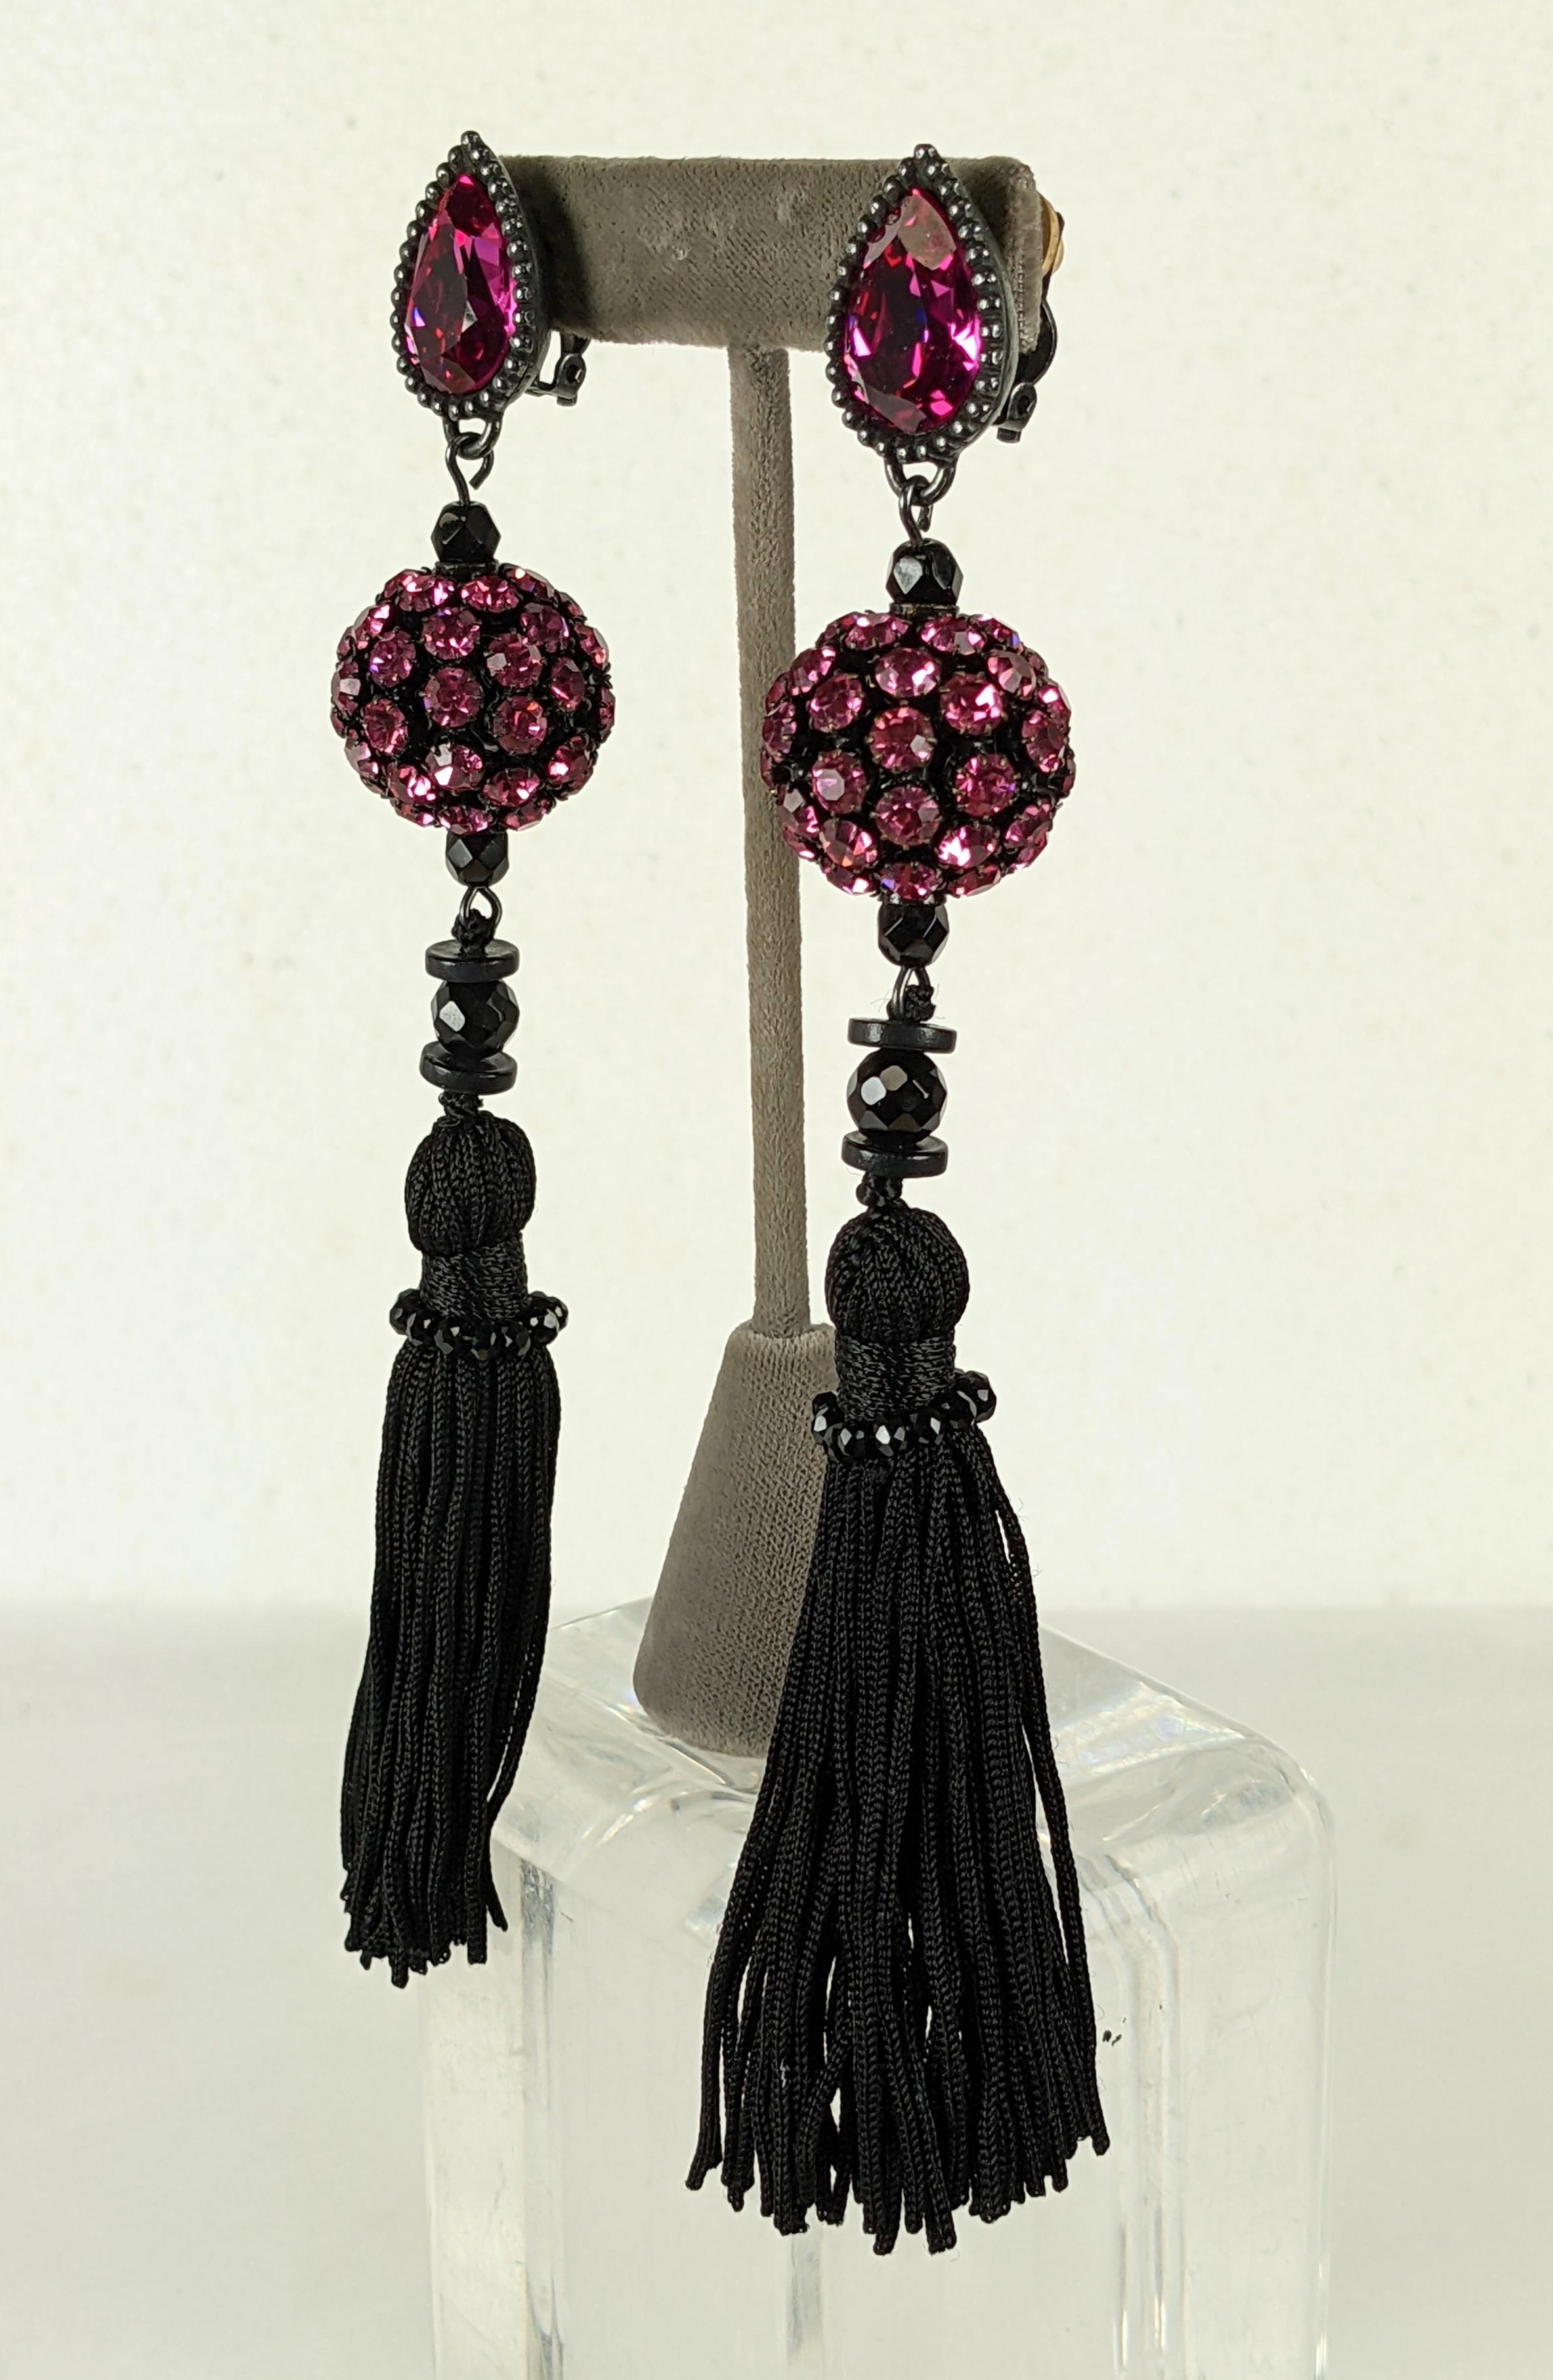 Yves Saint Laurent Rive Gauche Long Earrings In Excellent Condition For Sale In New York, NY